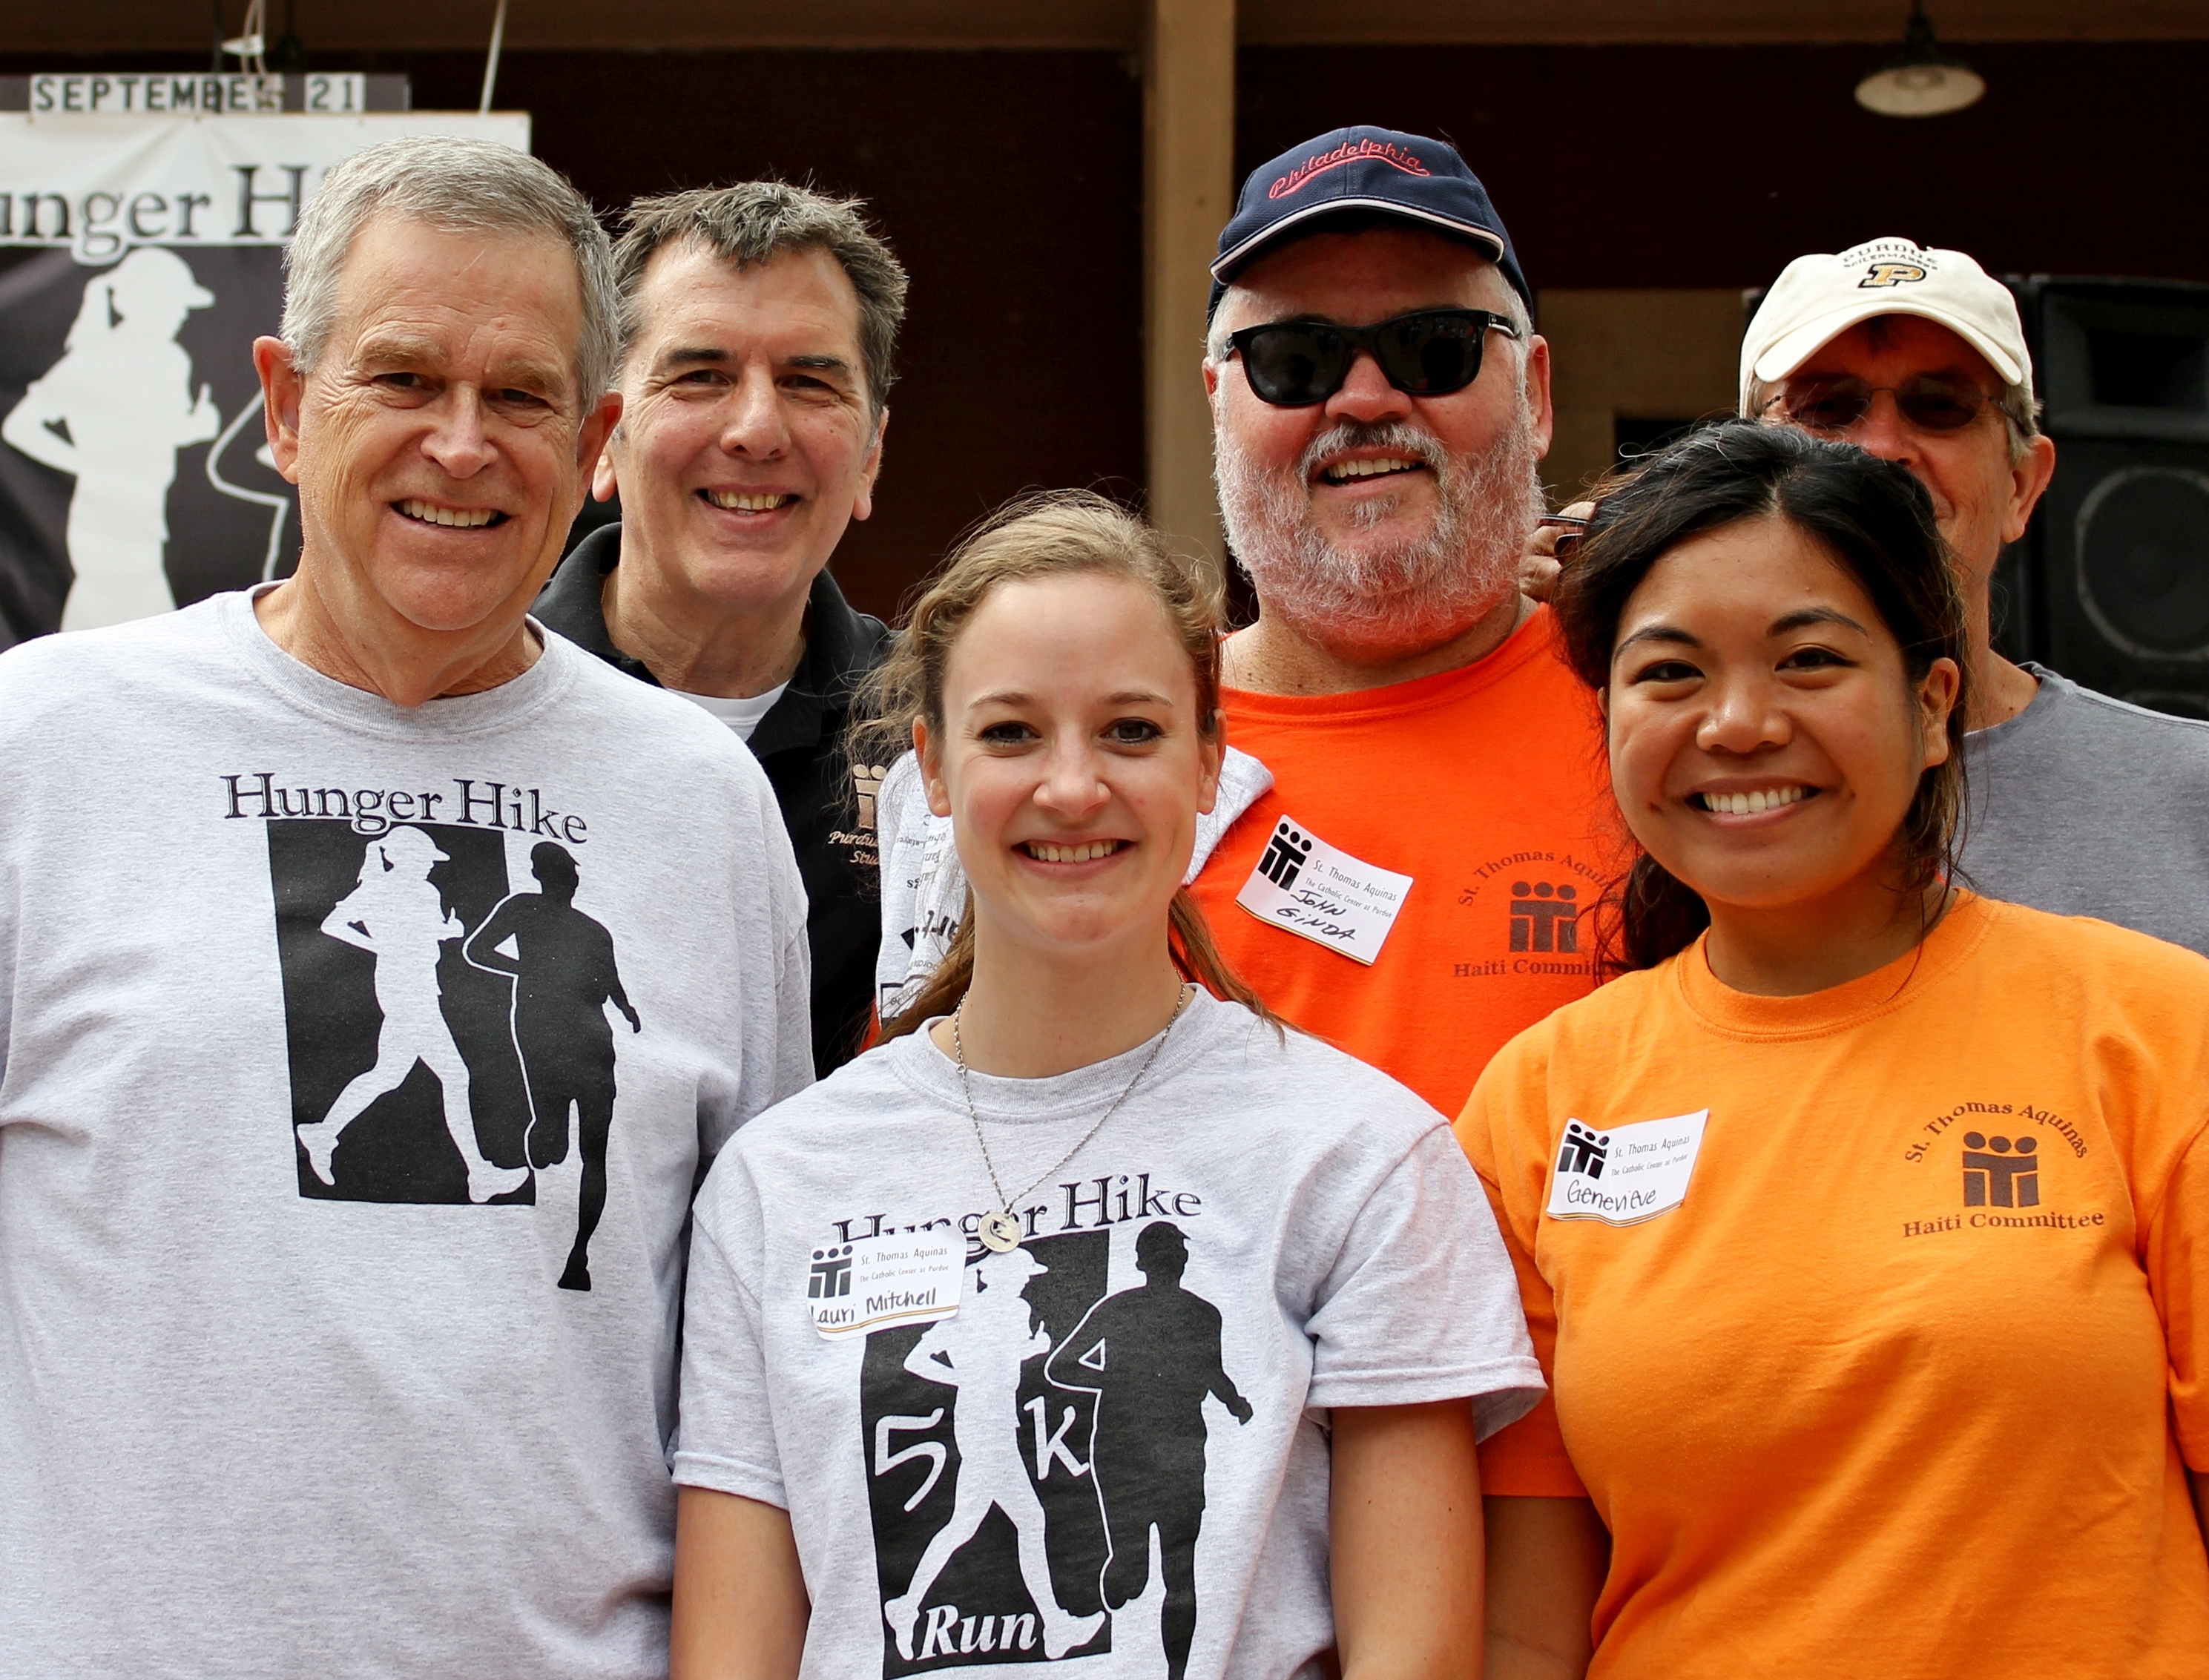 Top Fundraisers - Rob Pahl, Fr. Patrick & John Ginda with Hunger Hike Heroes!